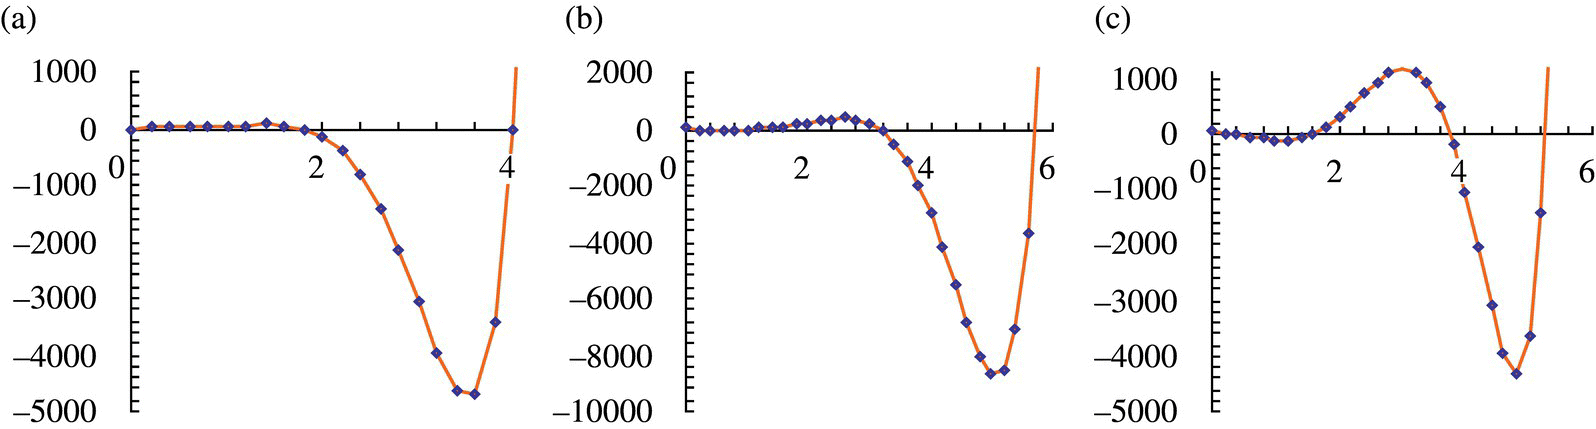 3 Graphs displaying ω–Δ(ω) curves under 3 kinds of boundary conditions: free–free (left), fixed–free (middle), and both simply supported (right).